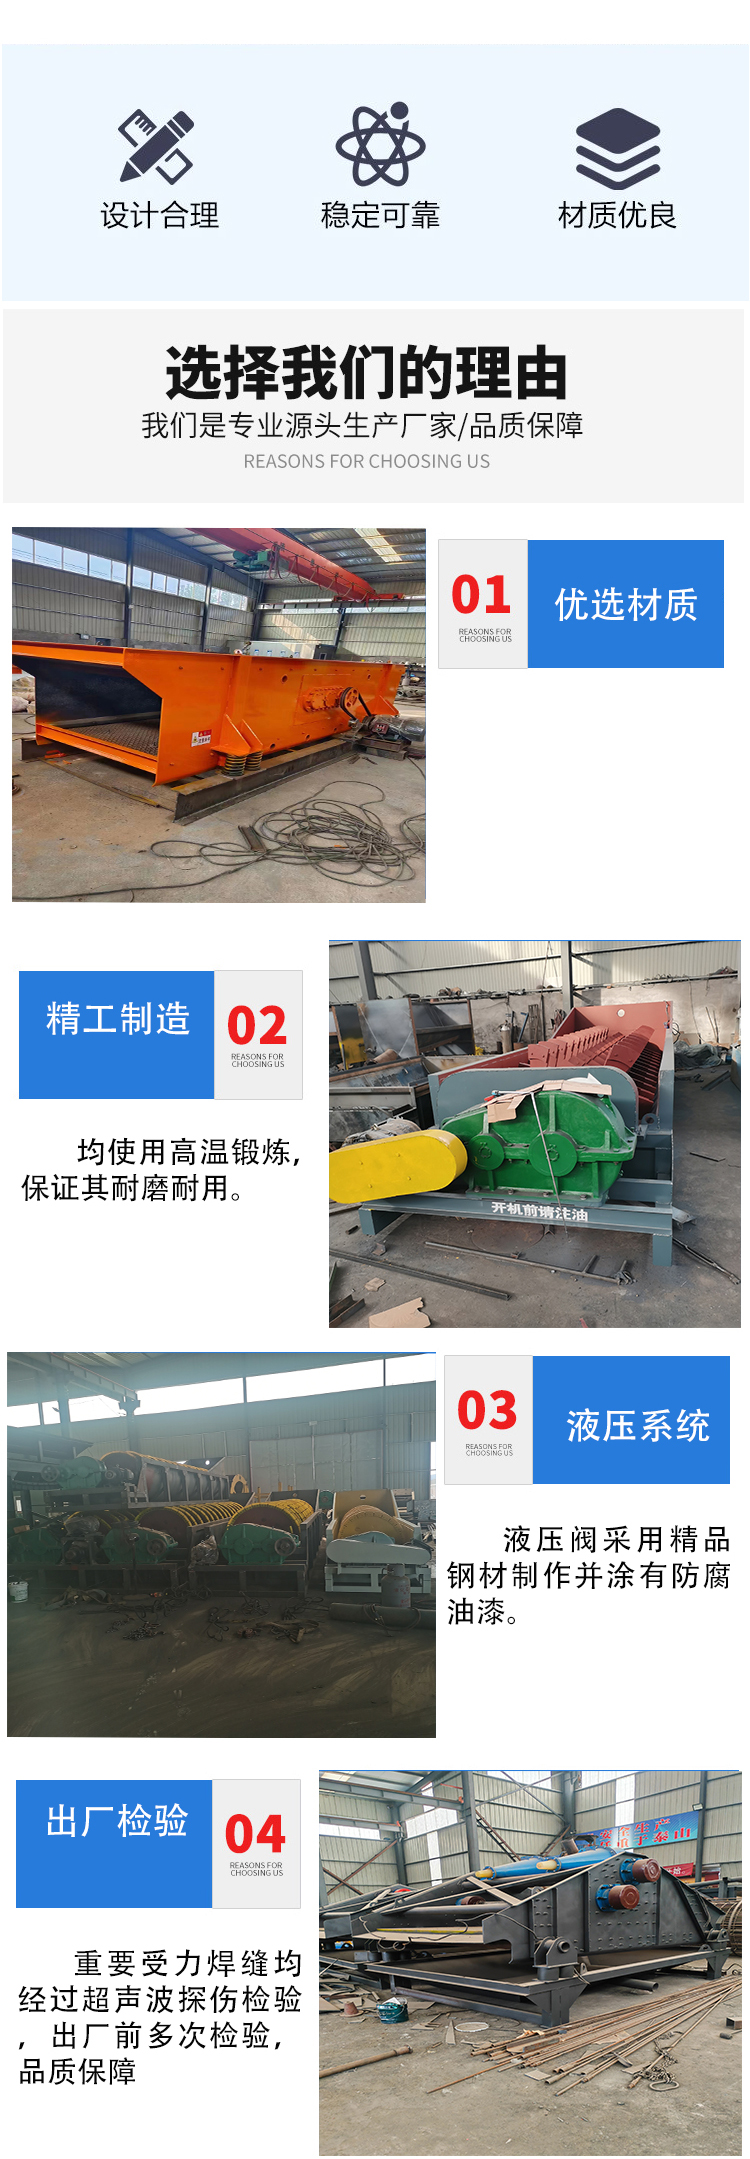 Roller sand screening machine with no shaft feeding, double layer sieve cylinder for screening sand and gravel aggregates, and fine material grading screen can be customized